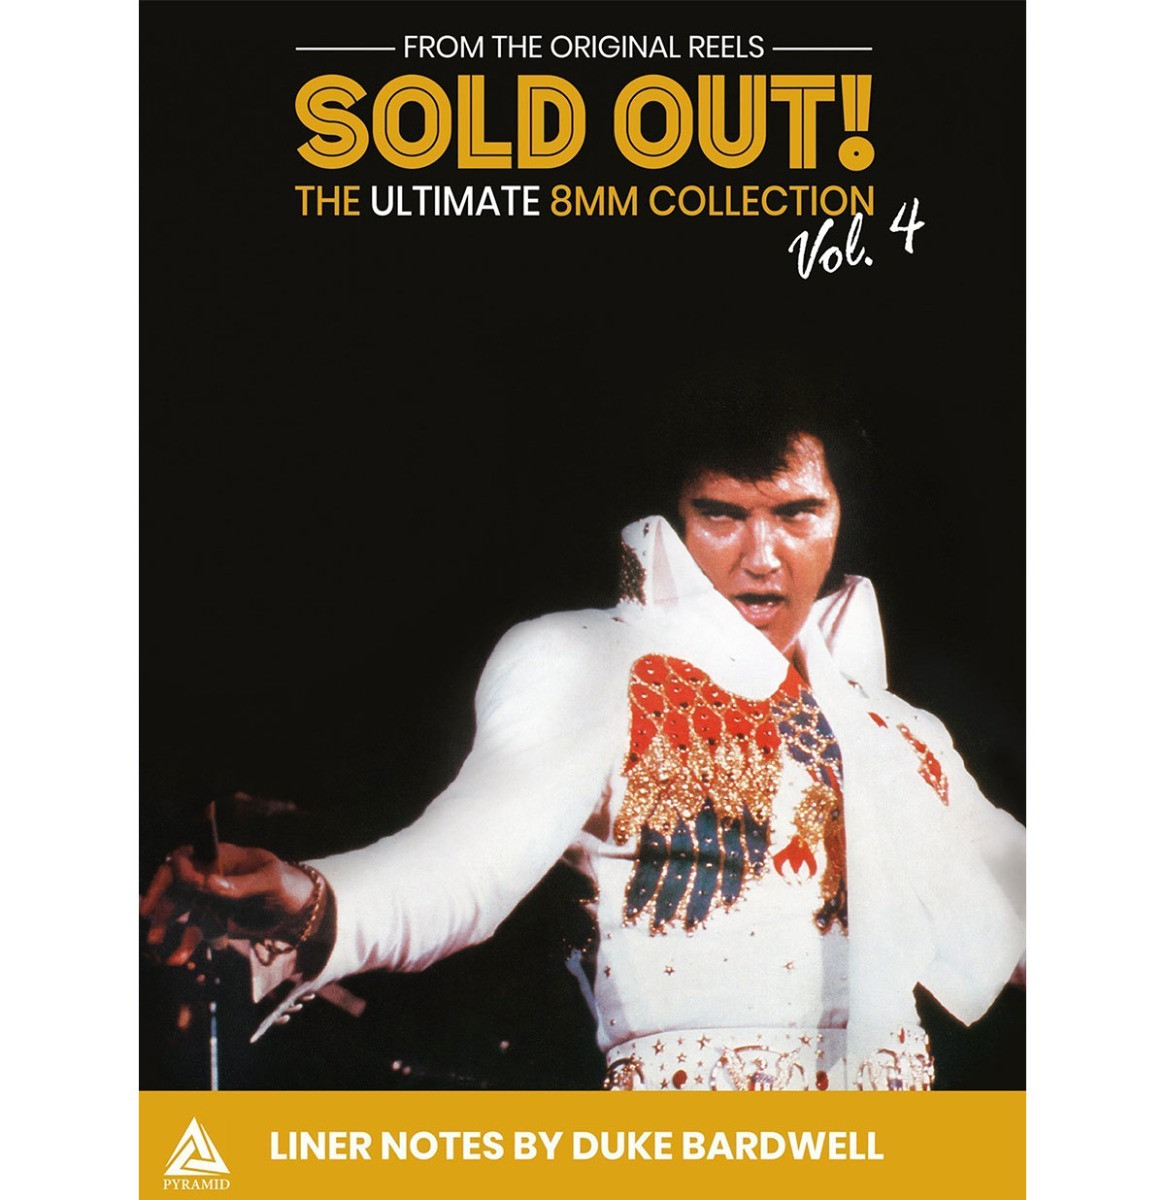 Elvis Presley: Sold Out! The Ultimate 8MM Collection Vol. 4 - 2 DVD Set